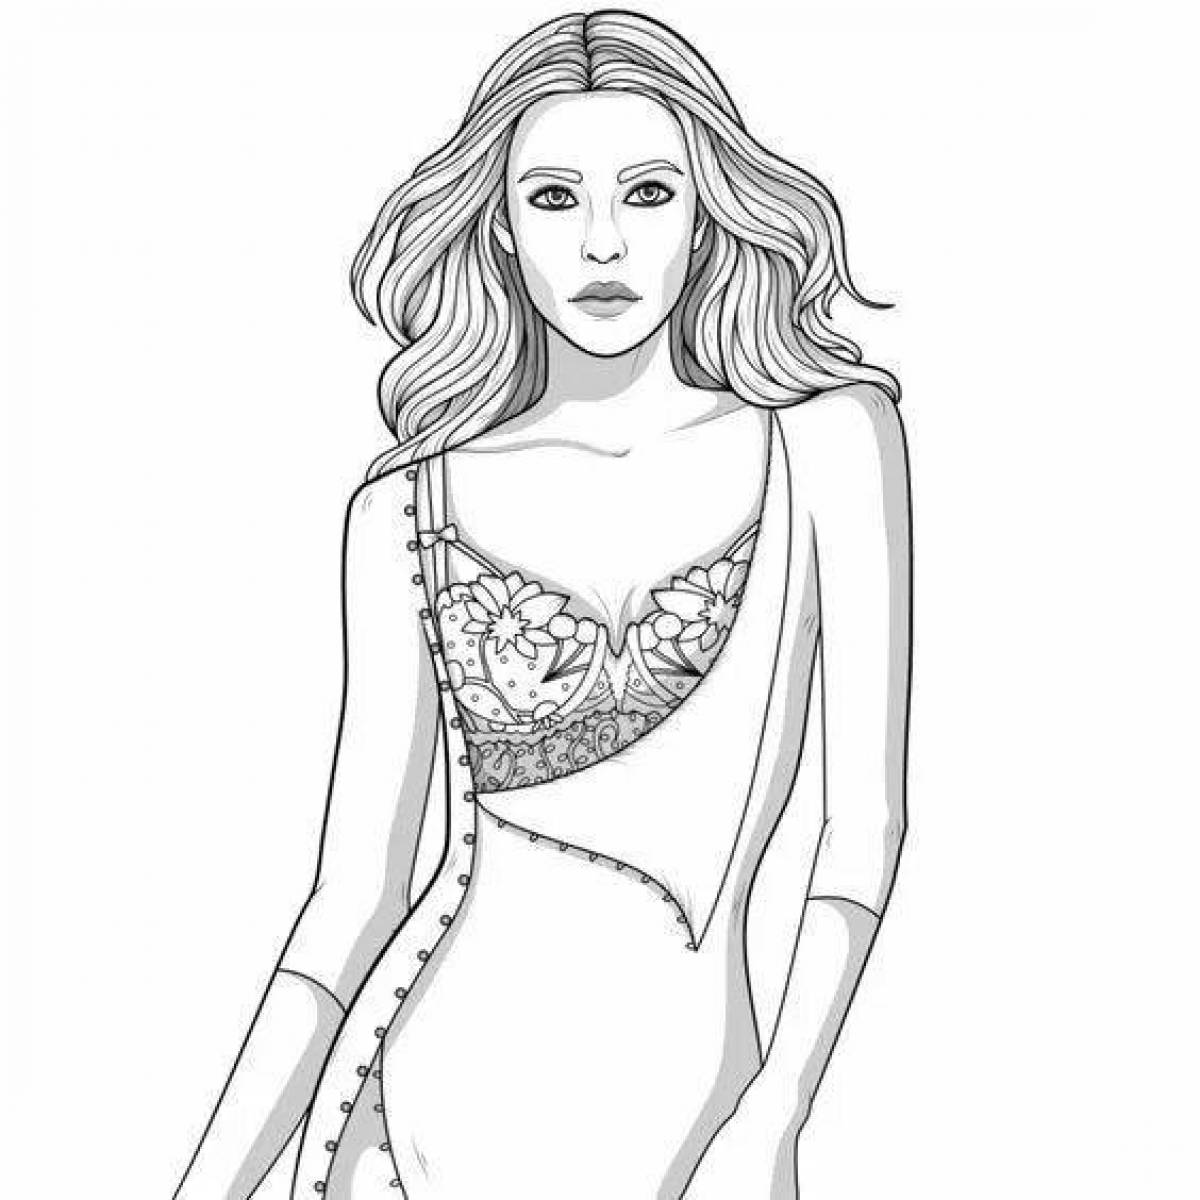 Sparkling 2022 fashion coloring page